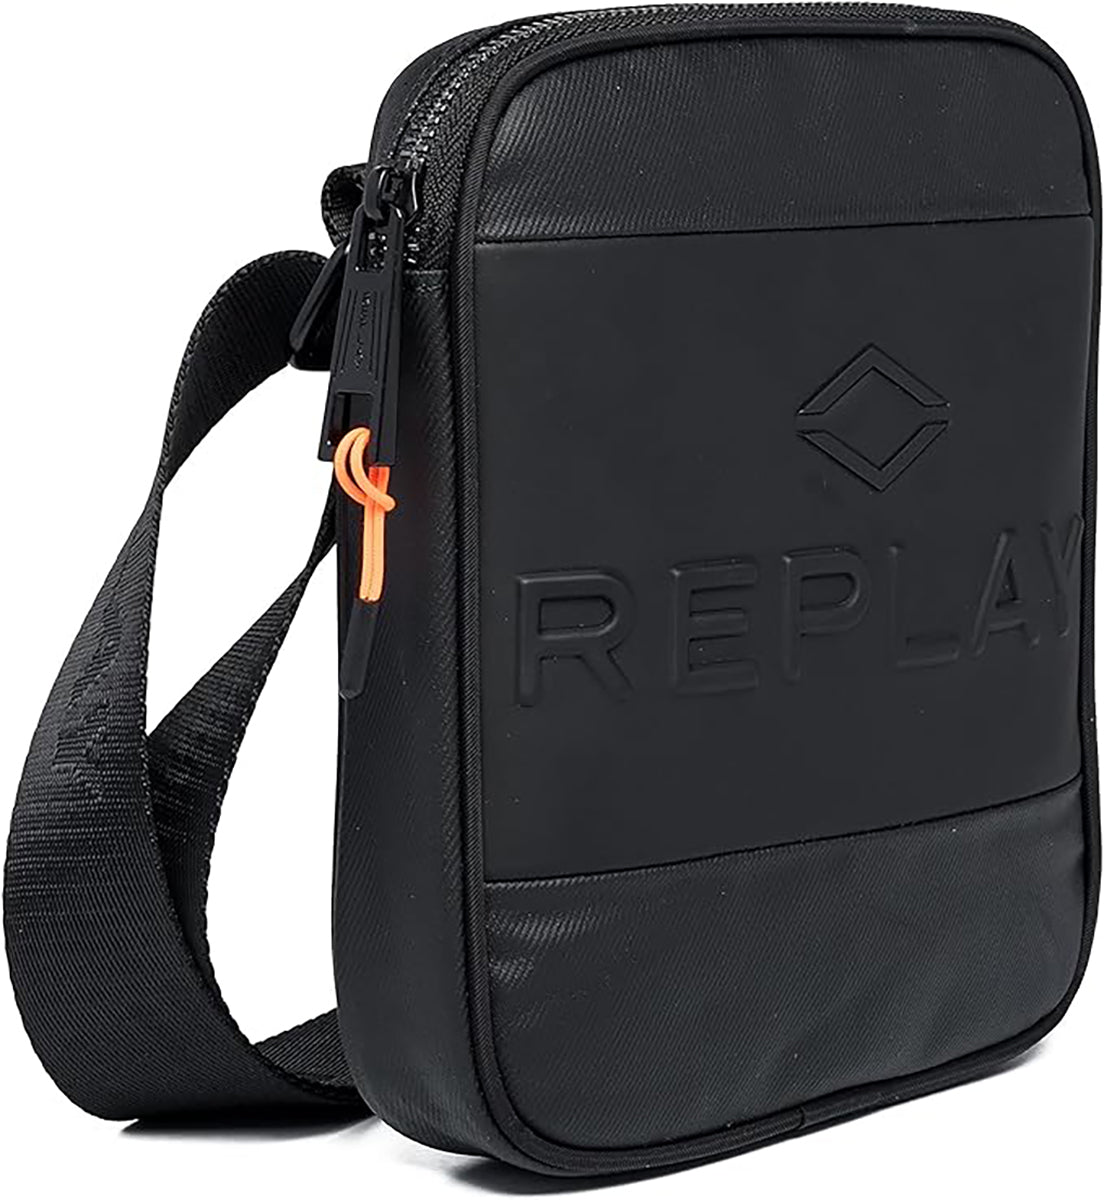 Replay Outlet Signoressa - Replay accessorise 🤩 Discover it!!! #replay  #replayjeans #accessories #bag #manwomancollection #springsummer | Facebook